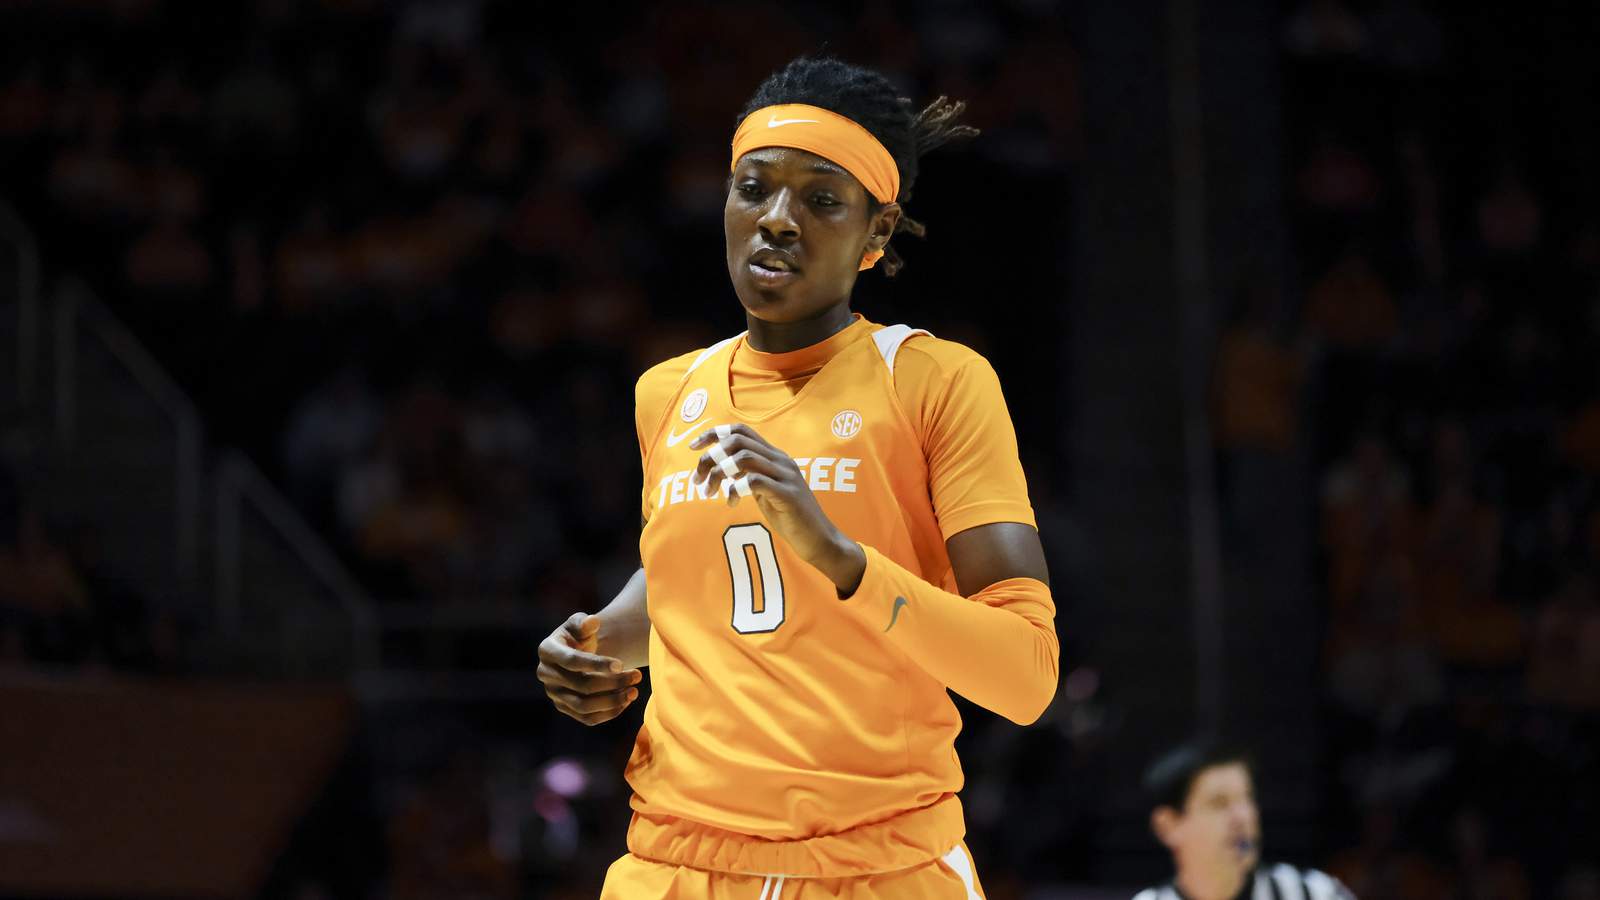 Ribault product Davis getting better and better for Lady Vols hoops team